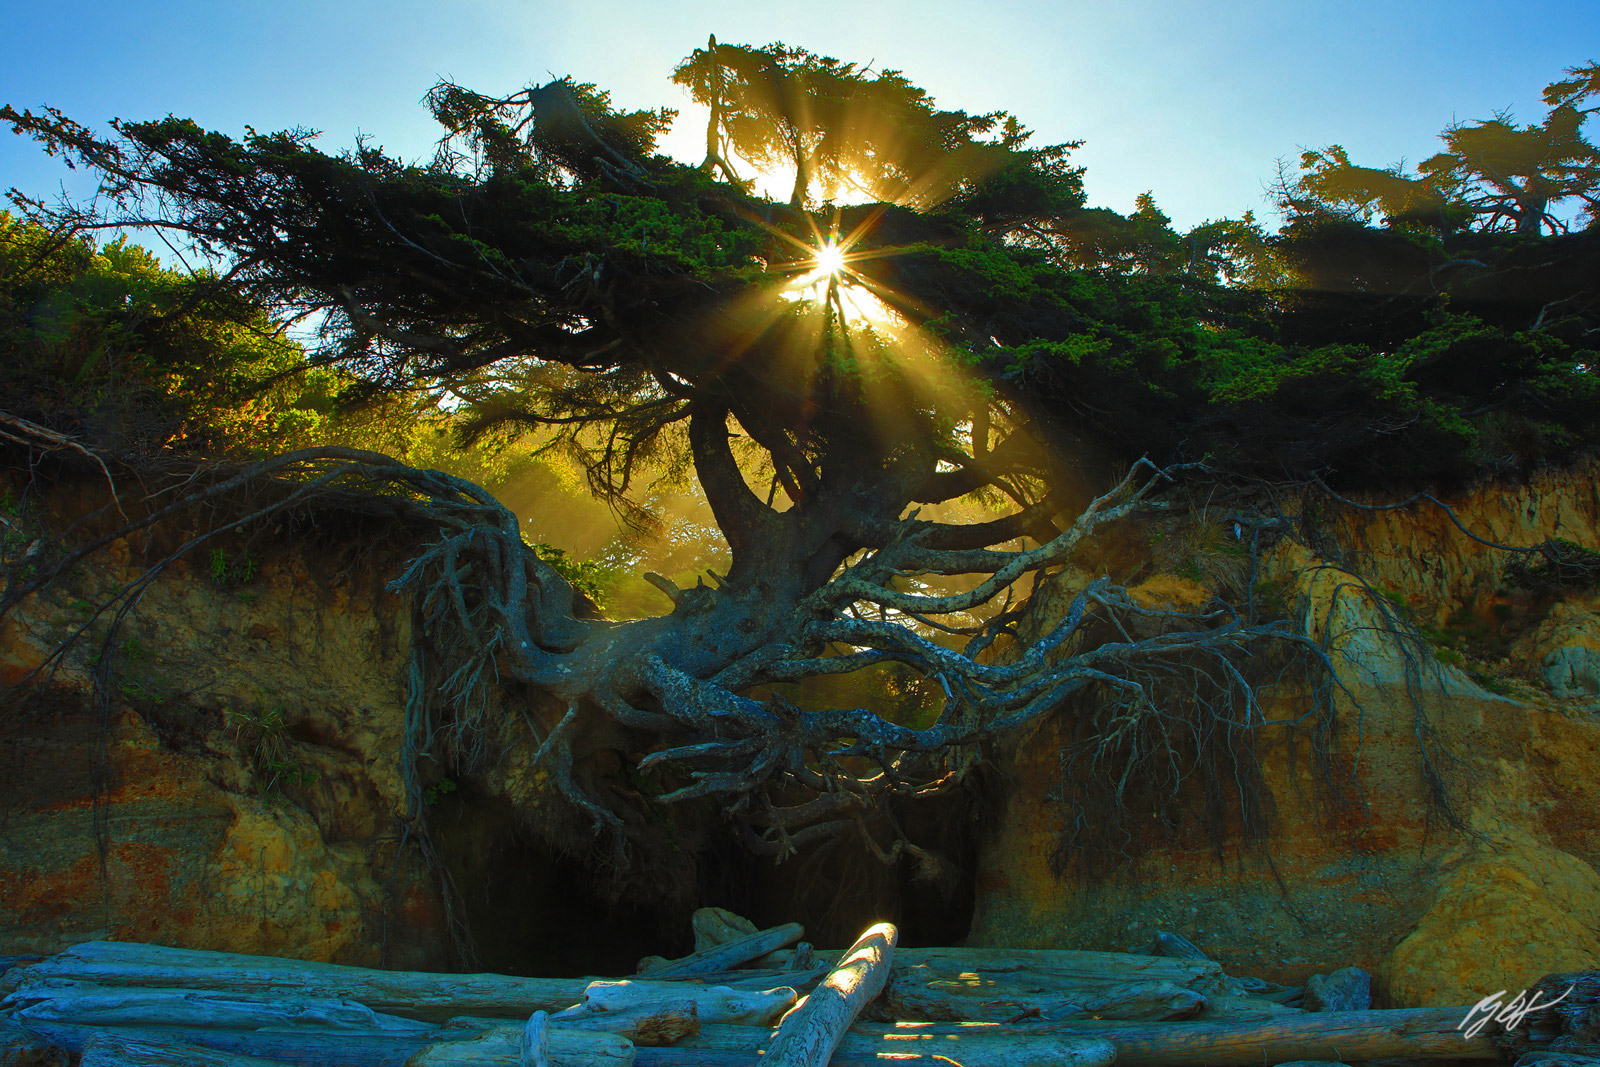 Sunrays beam through the Tree of Life from Kalaloch Beach in Olympic National Park in Washington